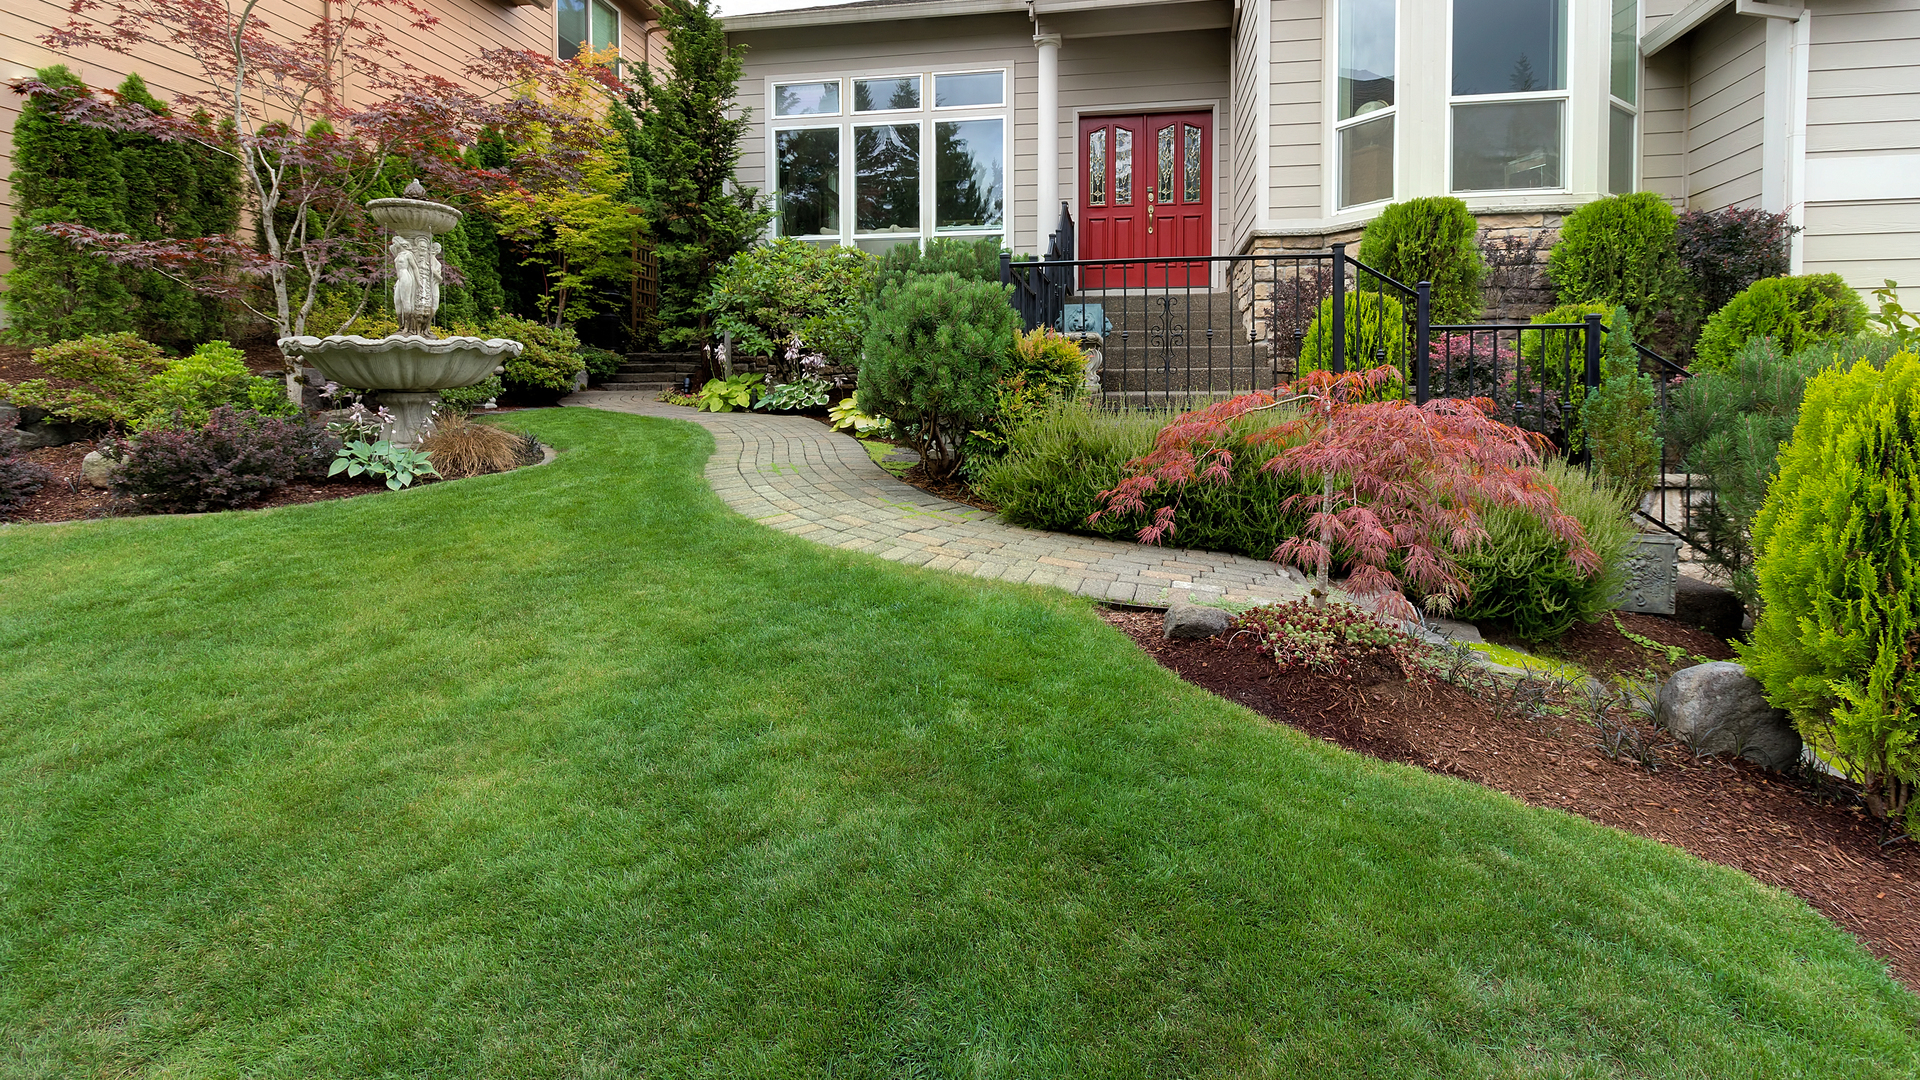 A home in Skippack, PA with extravagant landscaping and a healthy lawn.